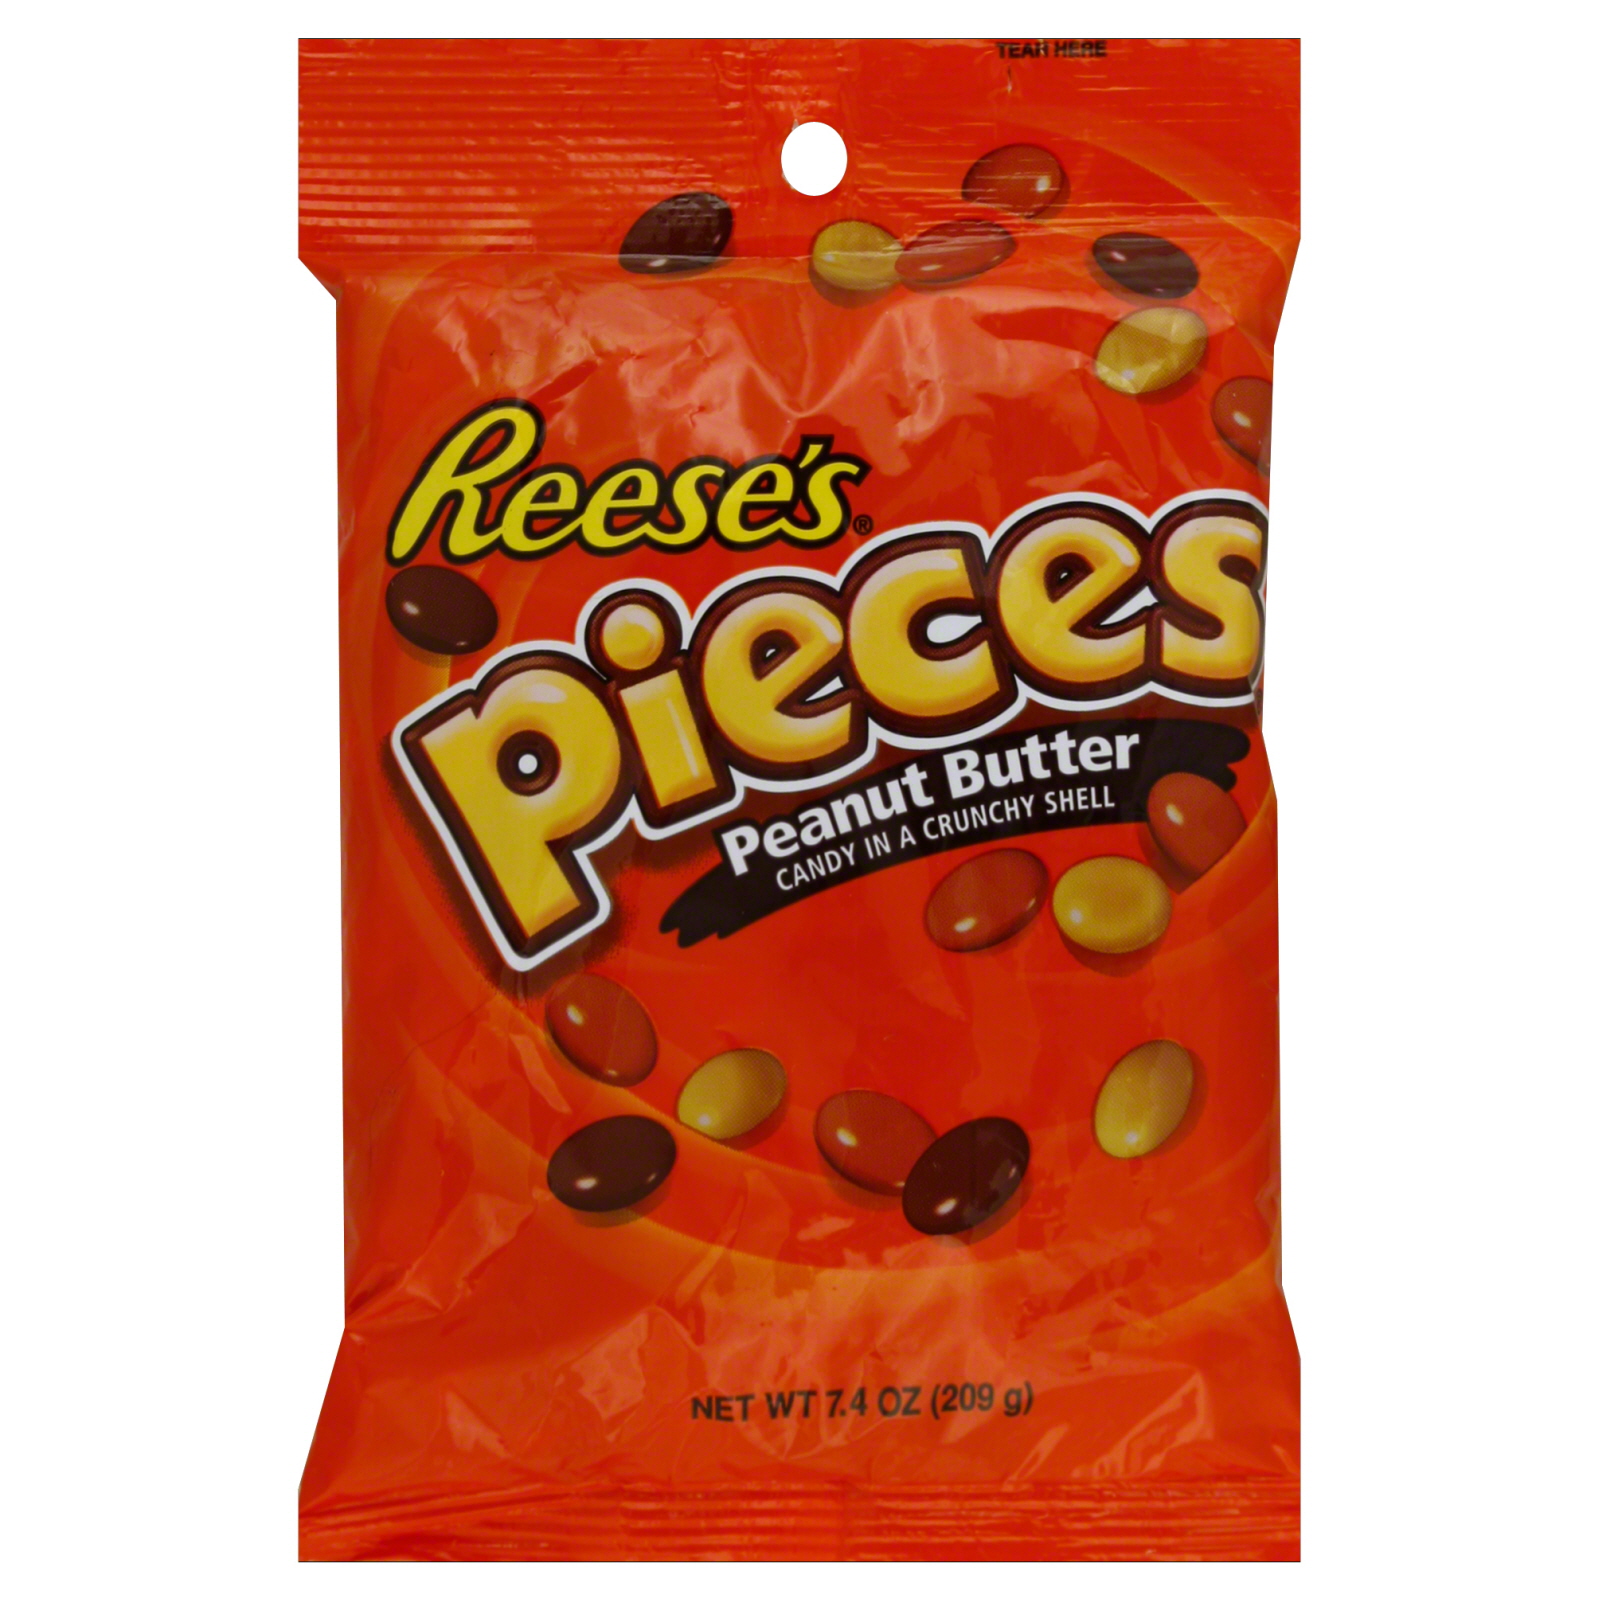 Reese's Candy, Peanut Butter , 7.4 oz (209 g)